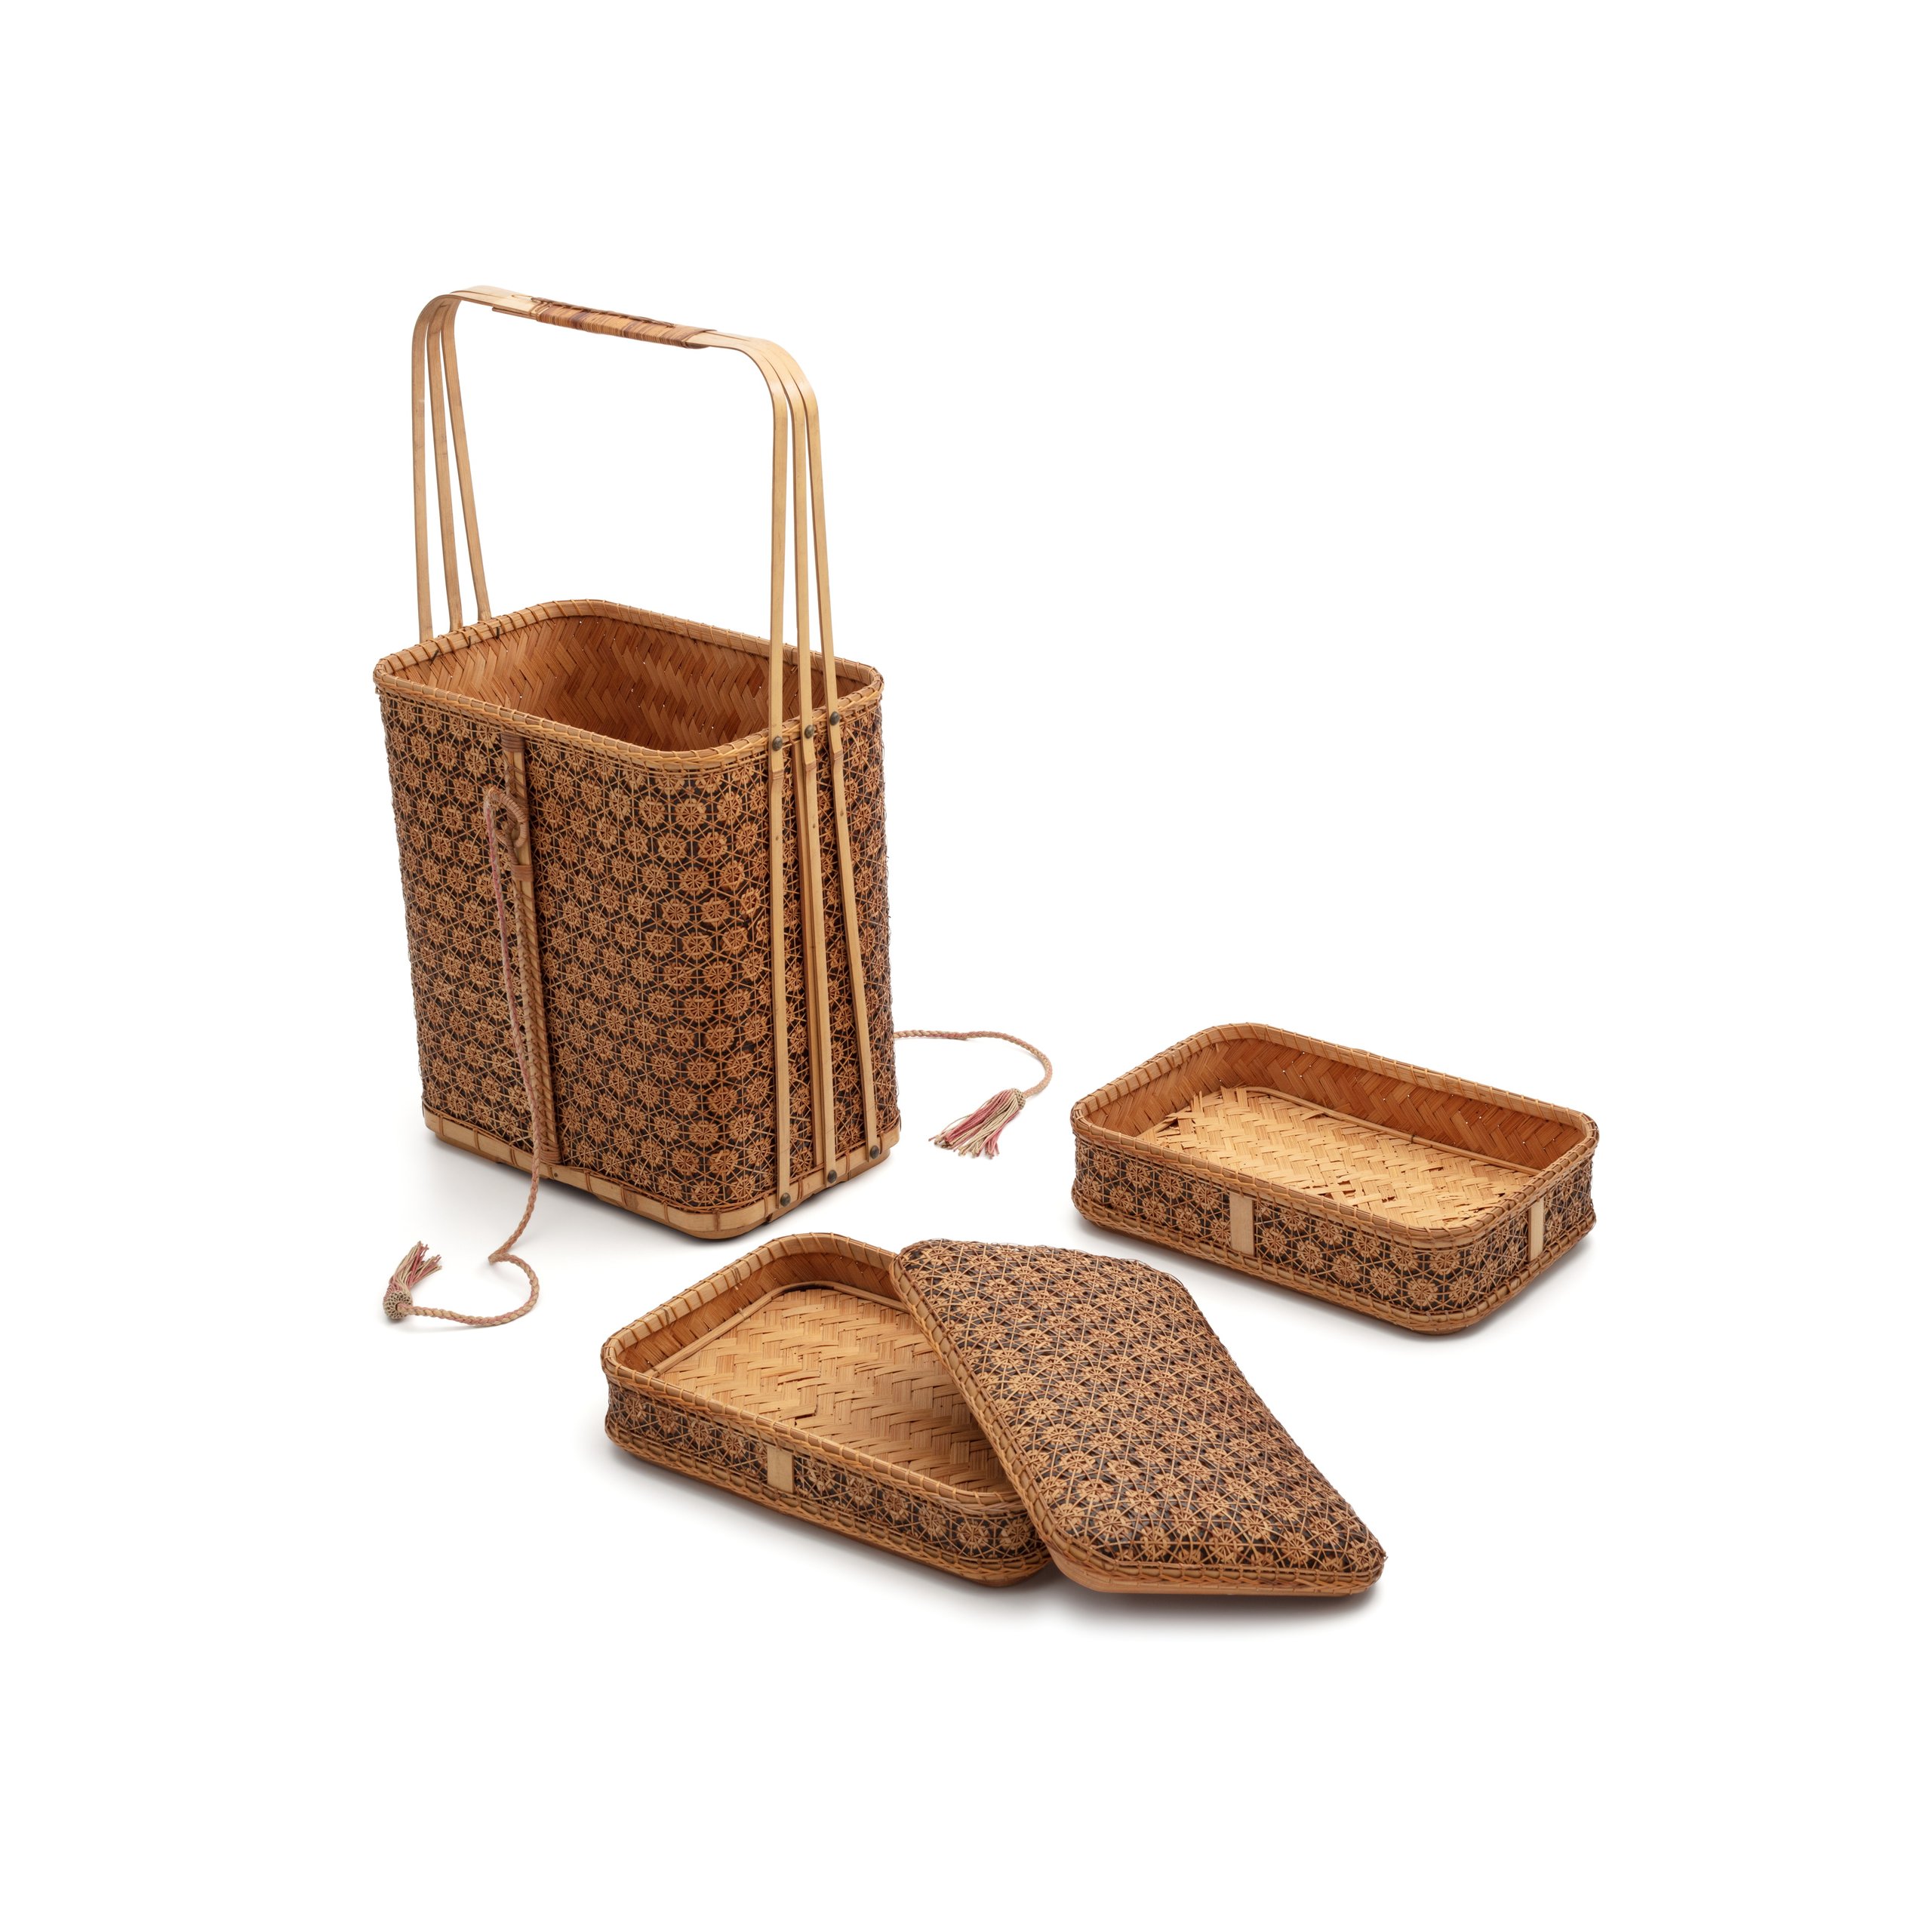 Bamboo basket with handle for tea utensils